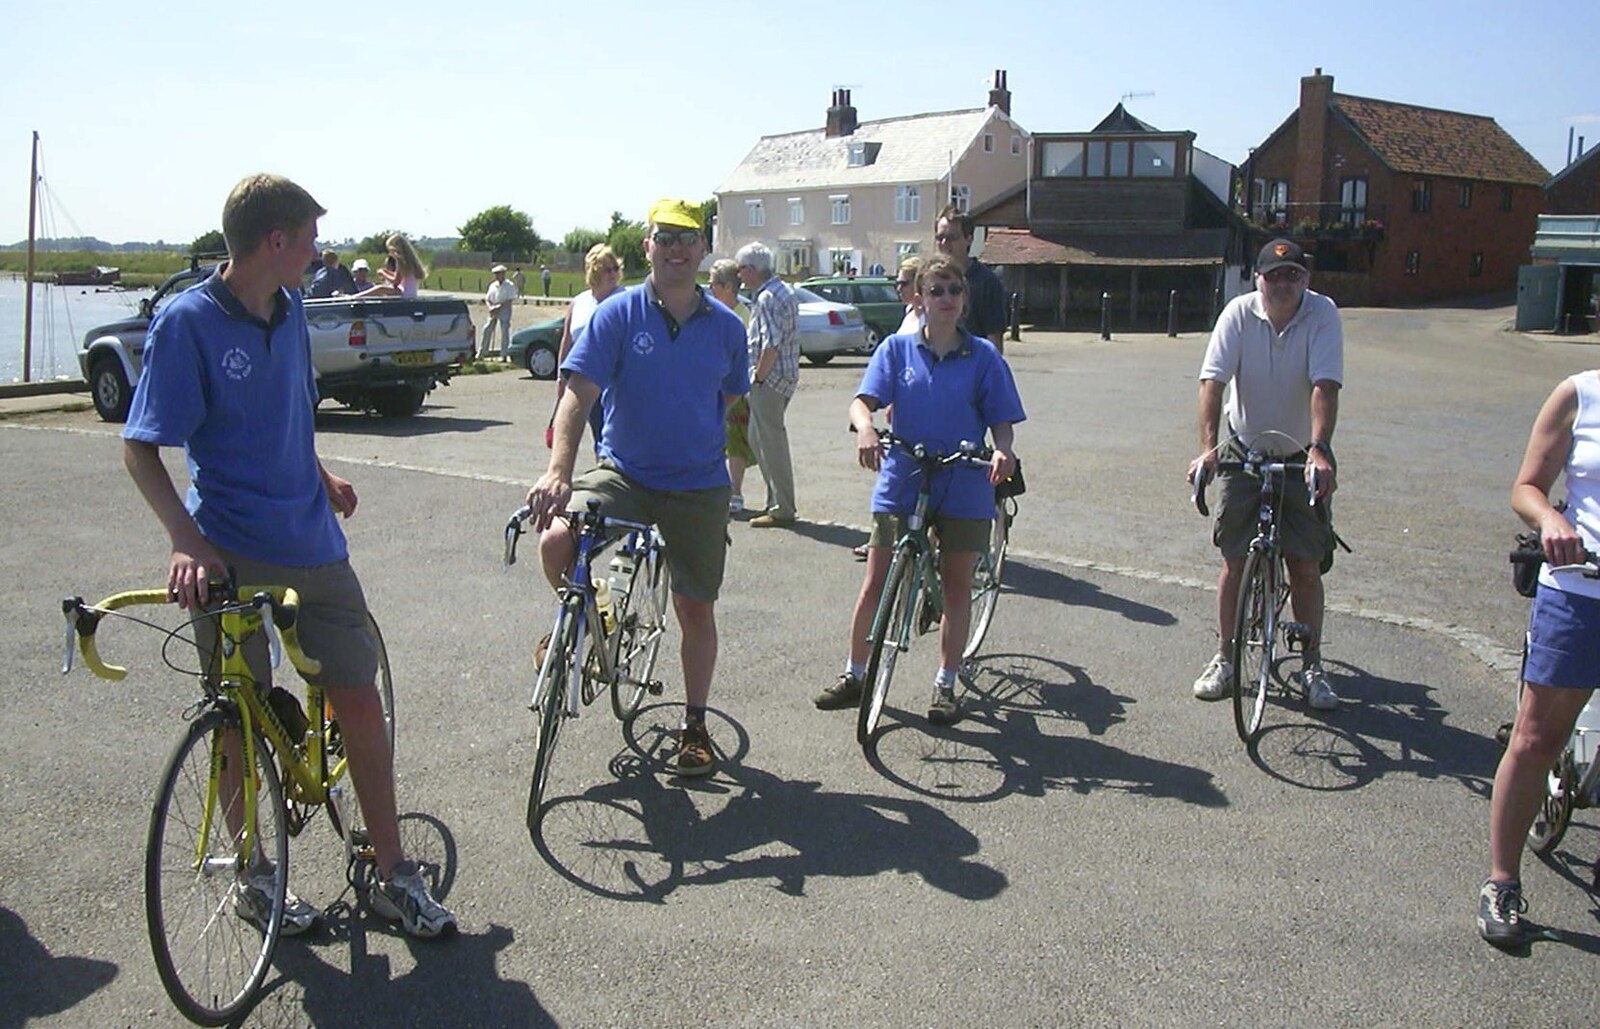 The BSCC Annual Bike Ride, Orford, Suffolk - 12th July 2003: Phil, Marc, Sue and Bindery Dave